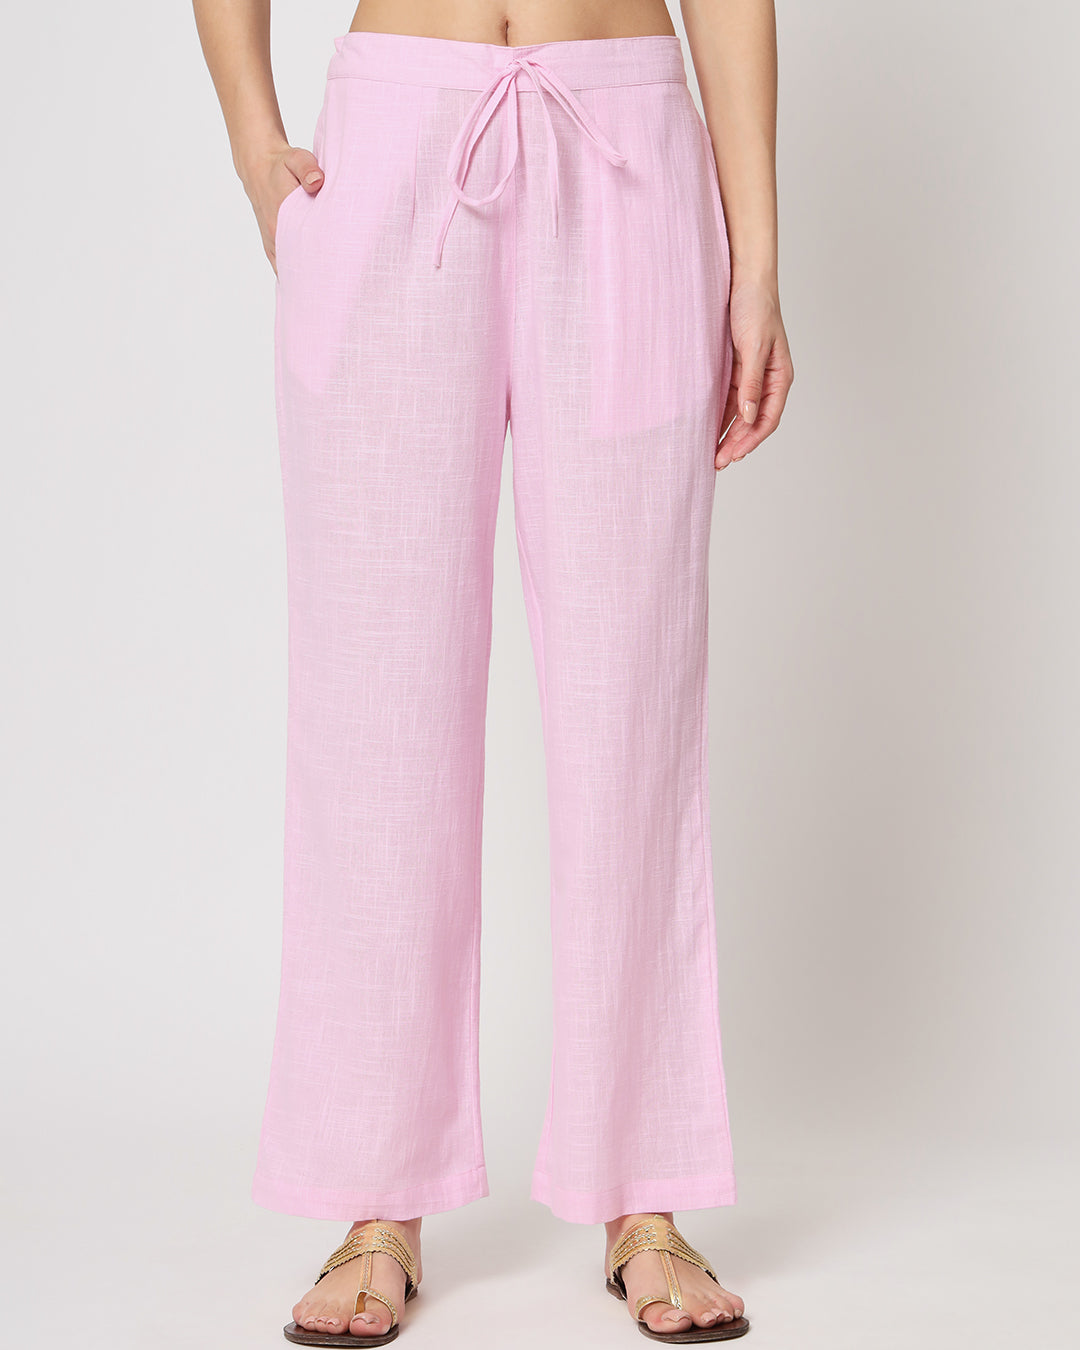 Combo: Iced Grey & Pink Mist Straight Pants- Set of 2